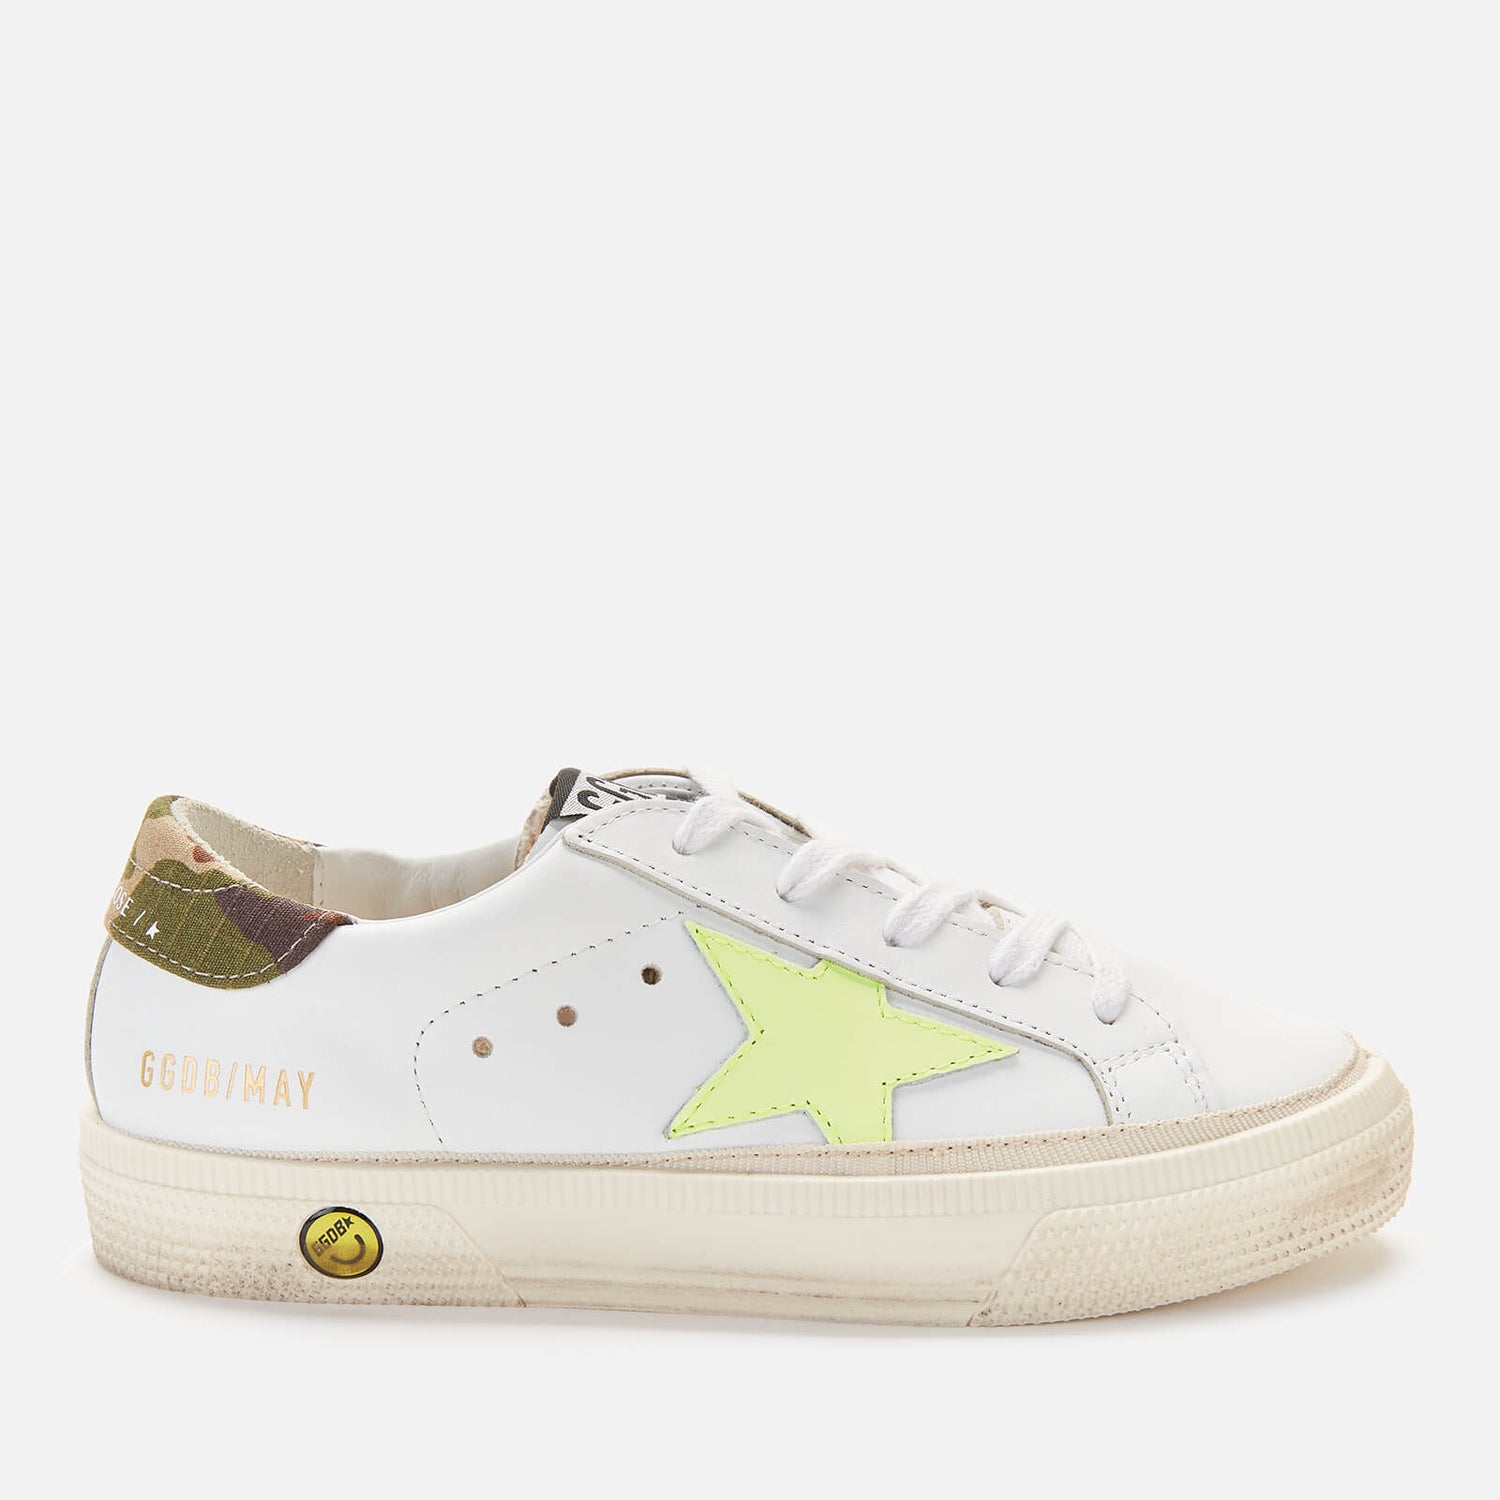 Golden Goose Kids' Leather Upper Star And Heel Trainers - White/Fluo Yellow/Green Camouflage - UK 10 Kids